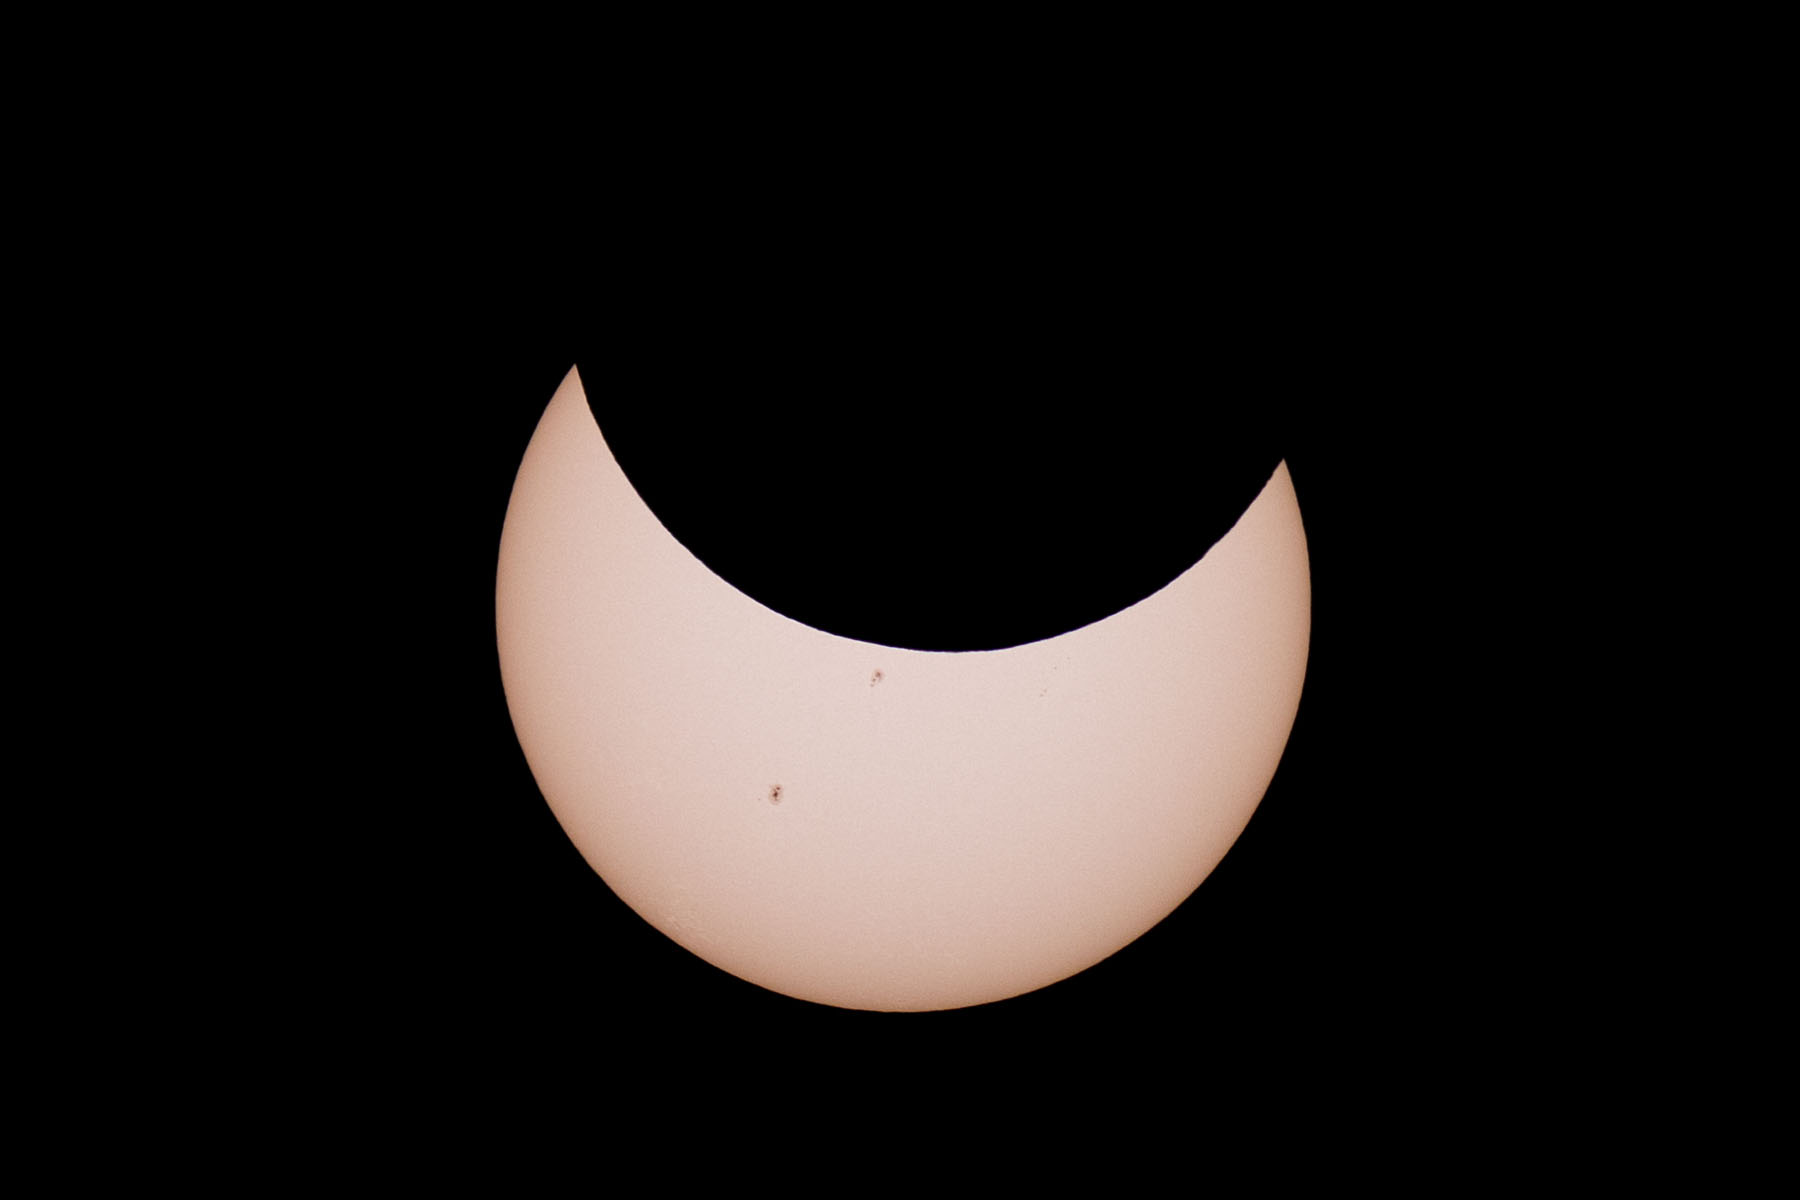 Annular solar eclipse, 39 minutes before peak.  Glass solar filter on Televue 85 telescope, Canon 6D Mark II camera on T-mount, 600mm F7 equivalent.  Click for next photo.